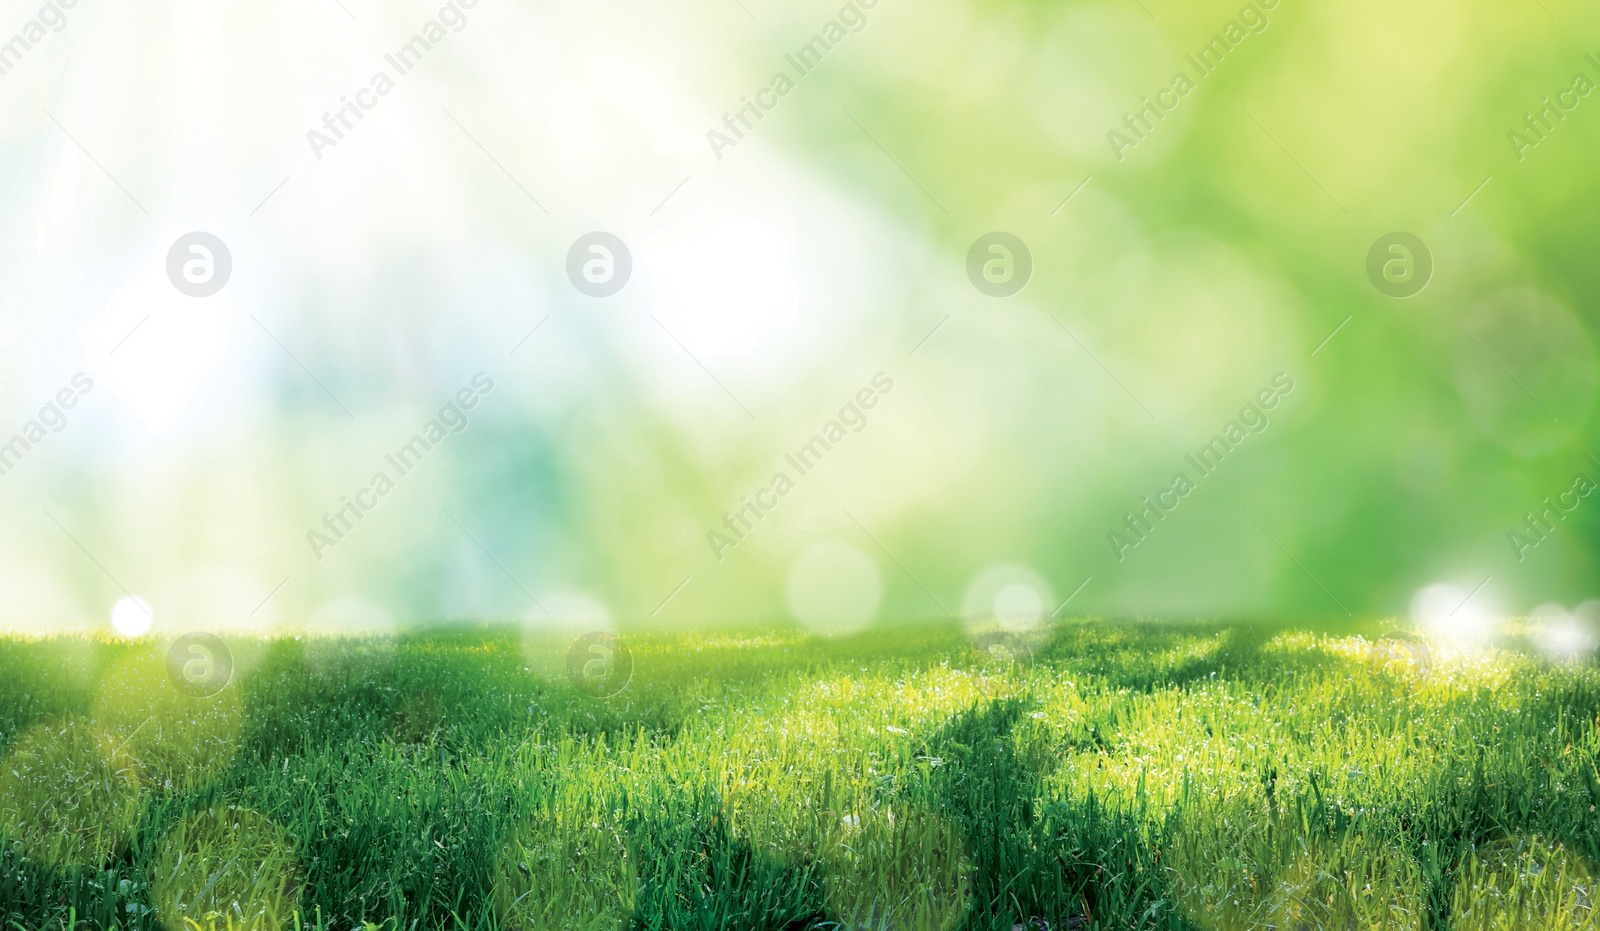 Image of Vibrant green grass outdoors on sunny day. Banner design